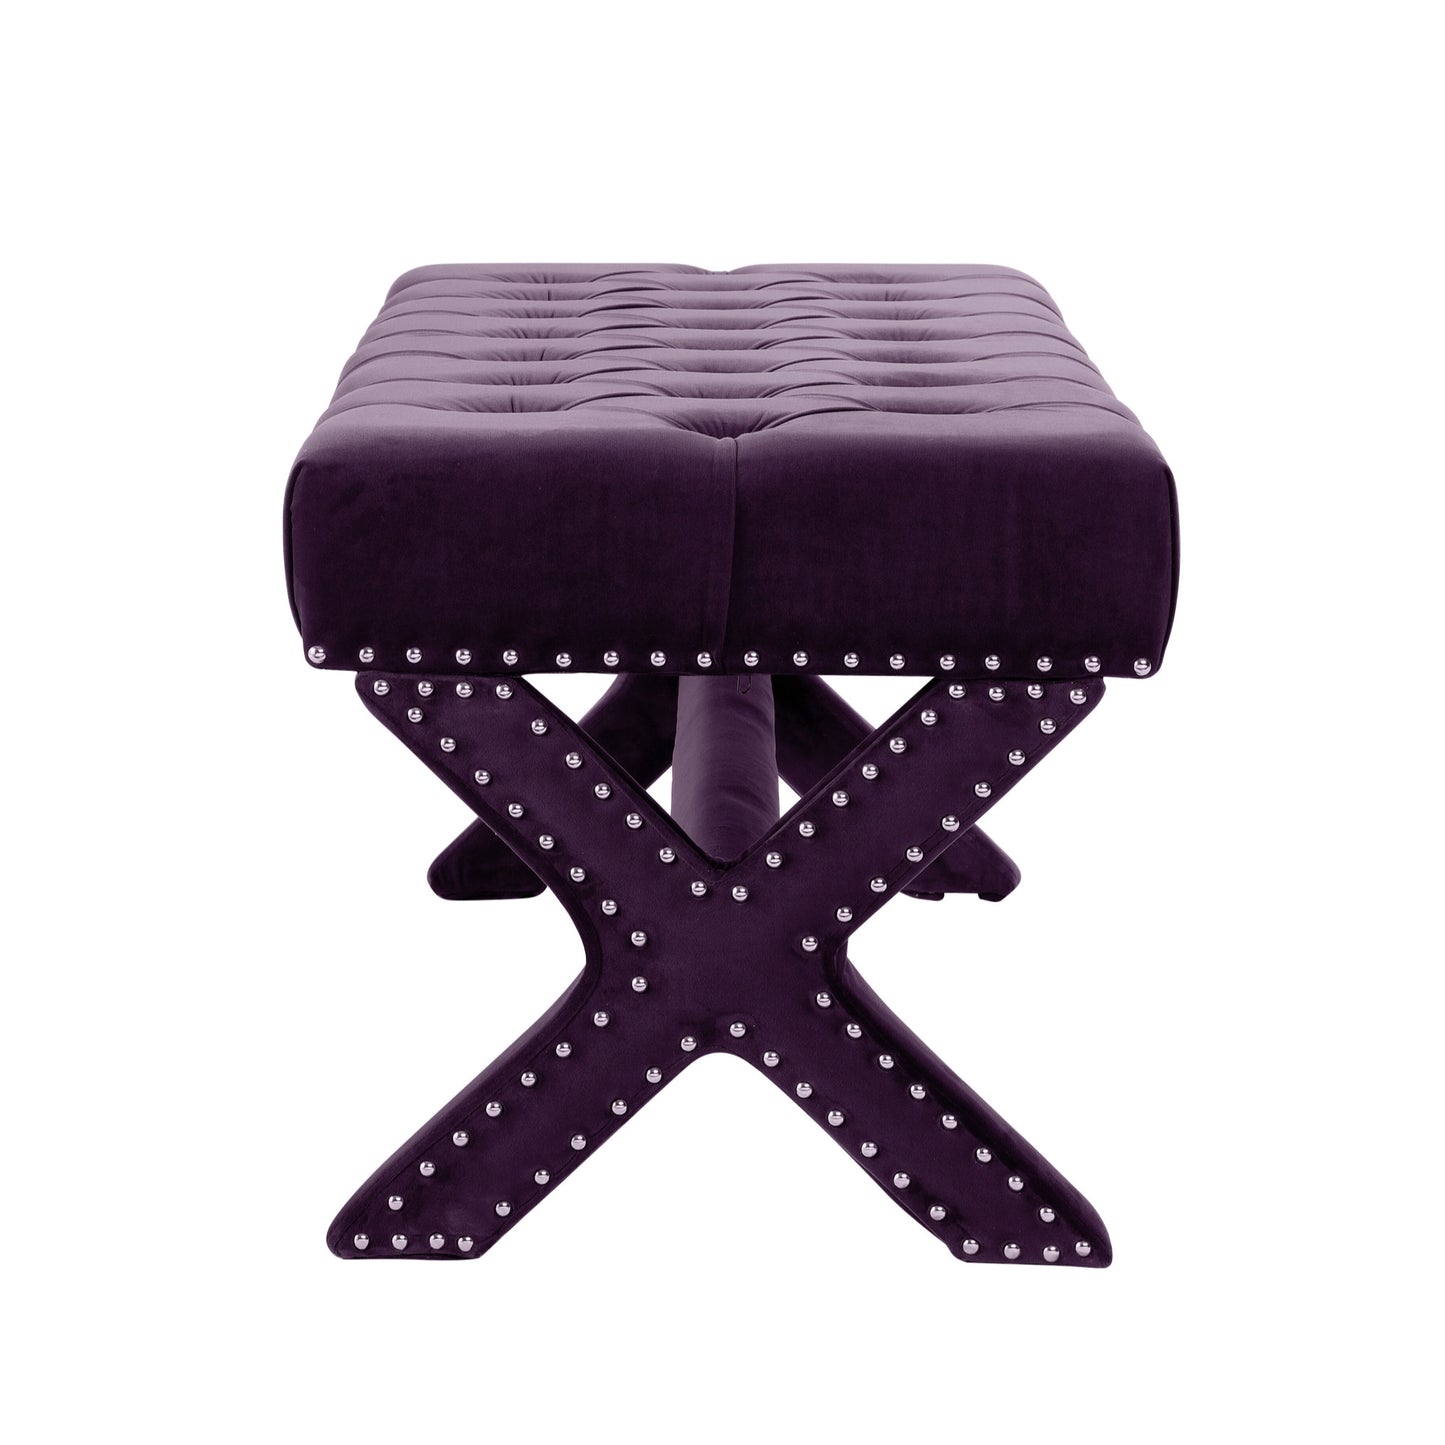 45" Plum And Purple Upholstered Velvet Bench By Homeroots